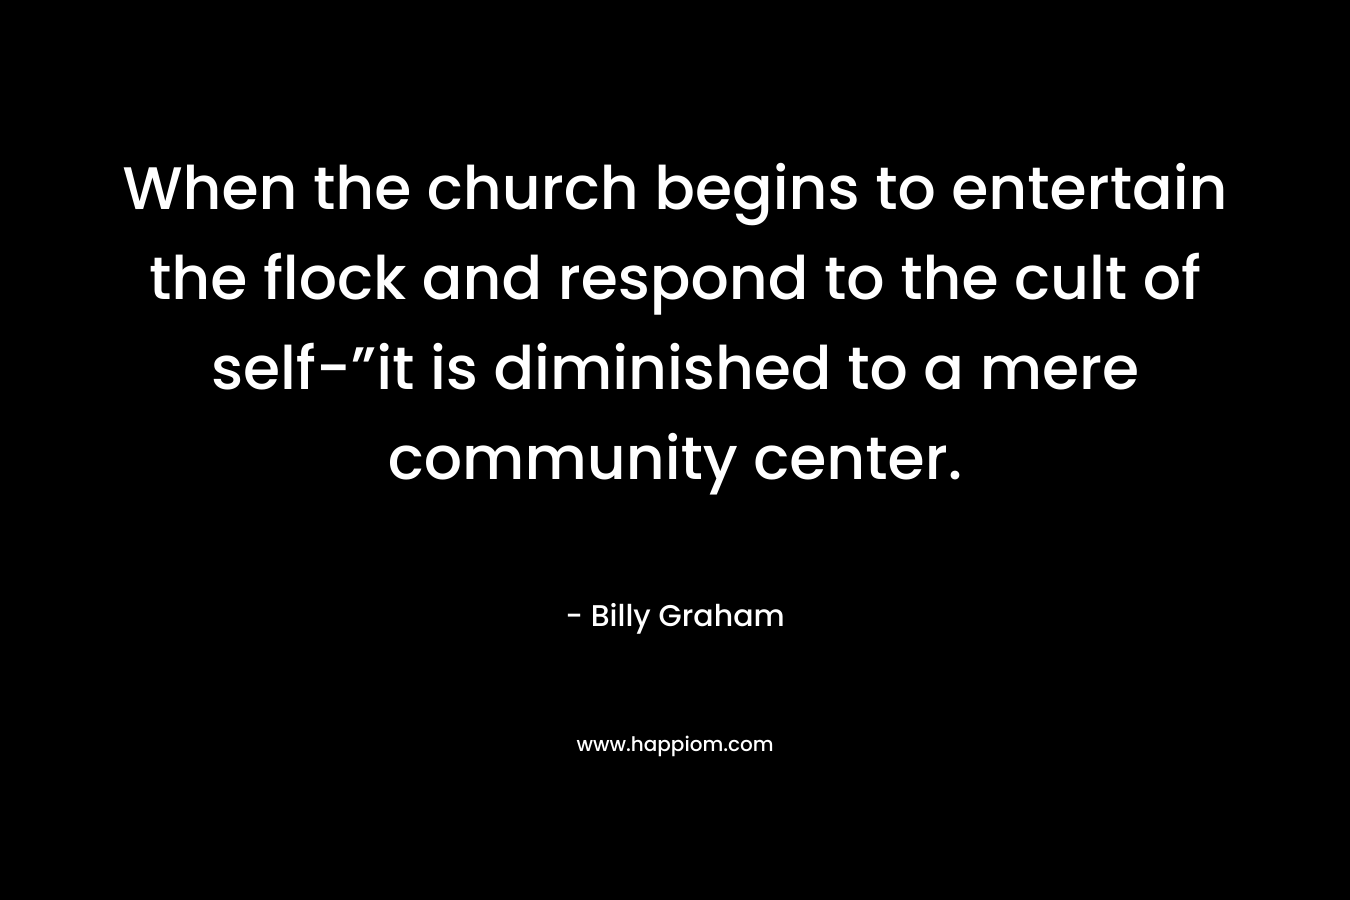 When the church begins to entertain the flock and respond to the cult of self-”it is diminished to a mere community center. – Billy Graham